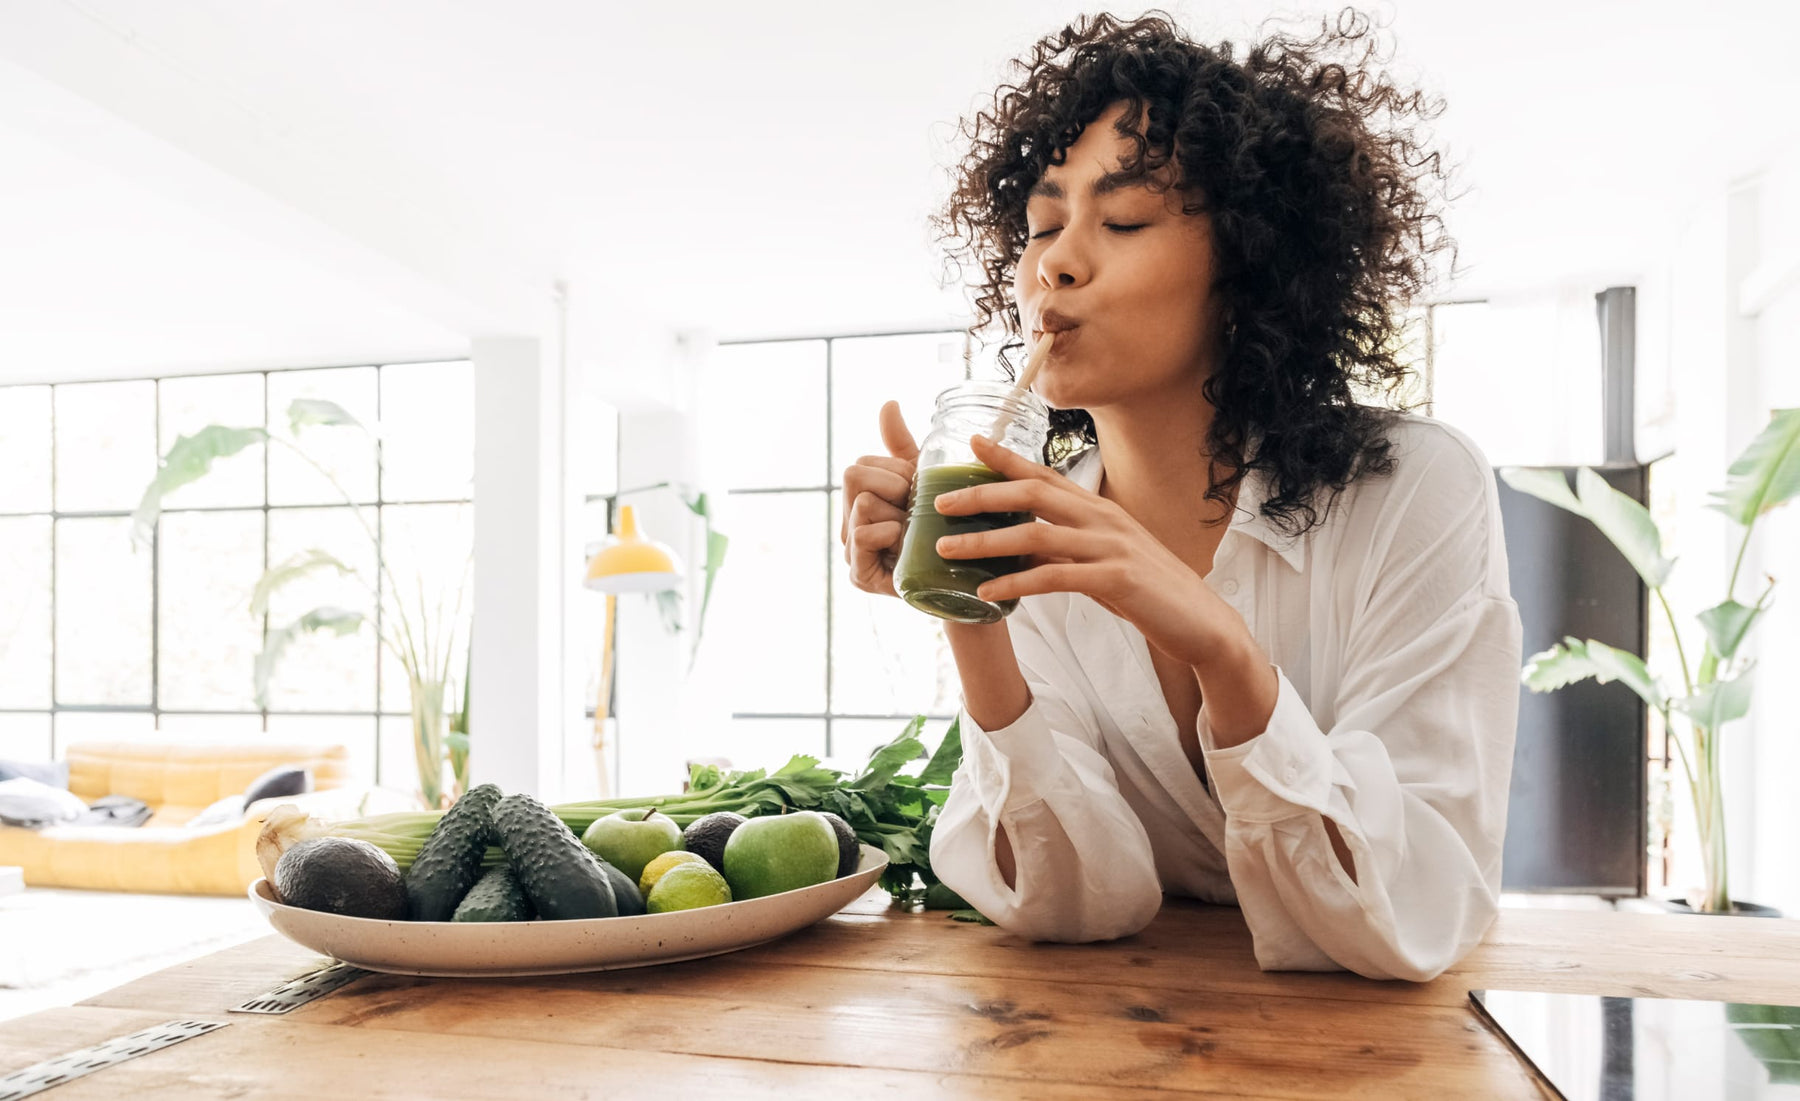 A woman enjoying a green Classic cleaning juice in a glass jar using a straw. Next to the woman is a plate of green fruit and vegetables, including an avocado, apple and lime. The woman is wearing a white shirt and sitting in a home setting.